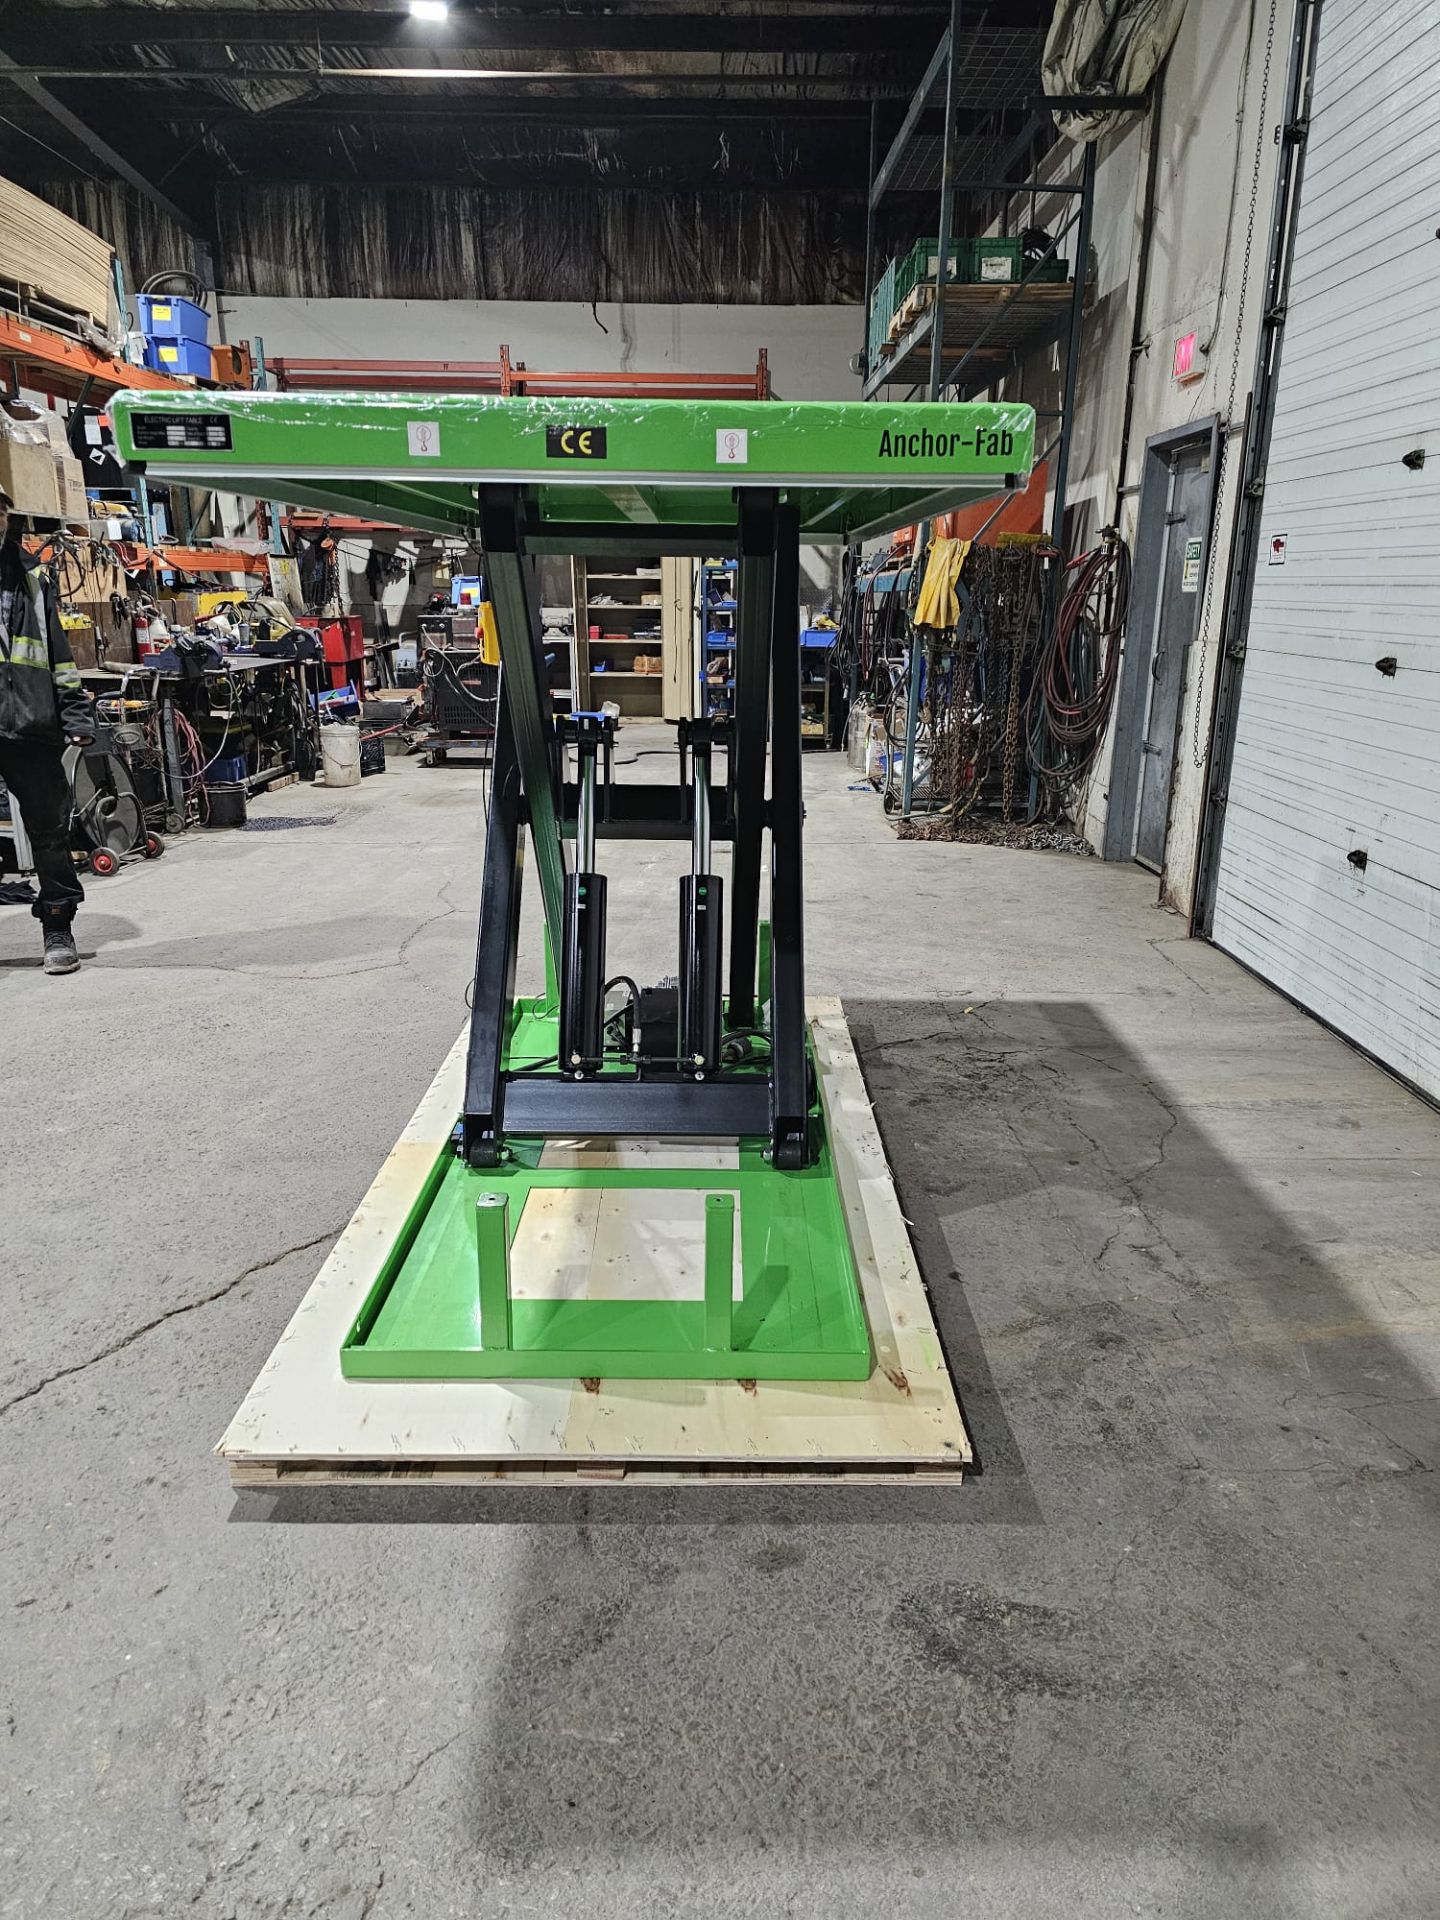 HW Hydraulic Lift Table 94" x 47" x 64" lift - 11,000lbs capacity - UNUSED and MINT - 220V - Image 7 of 8